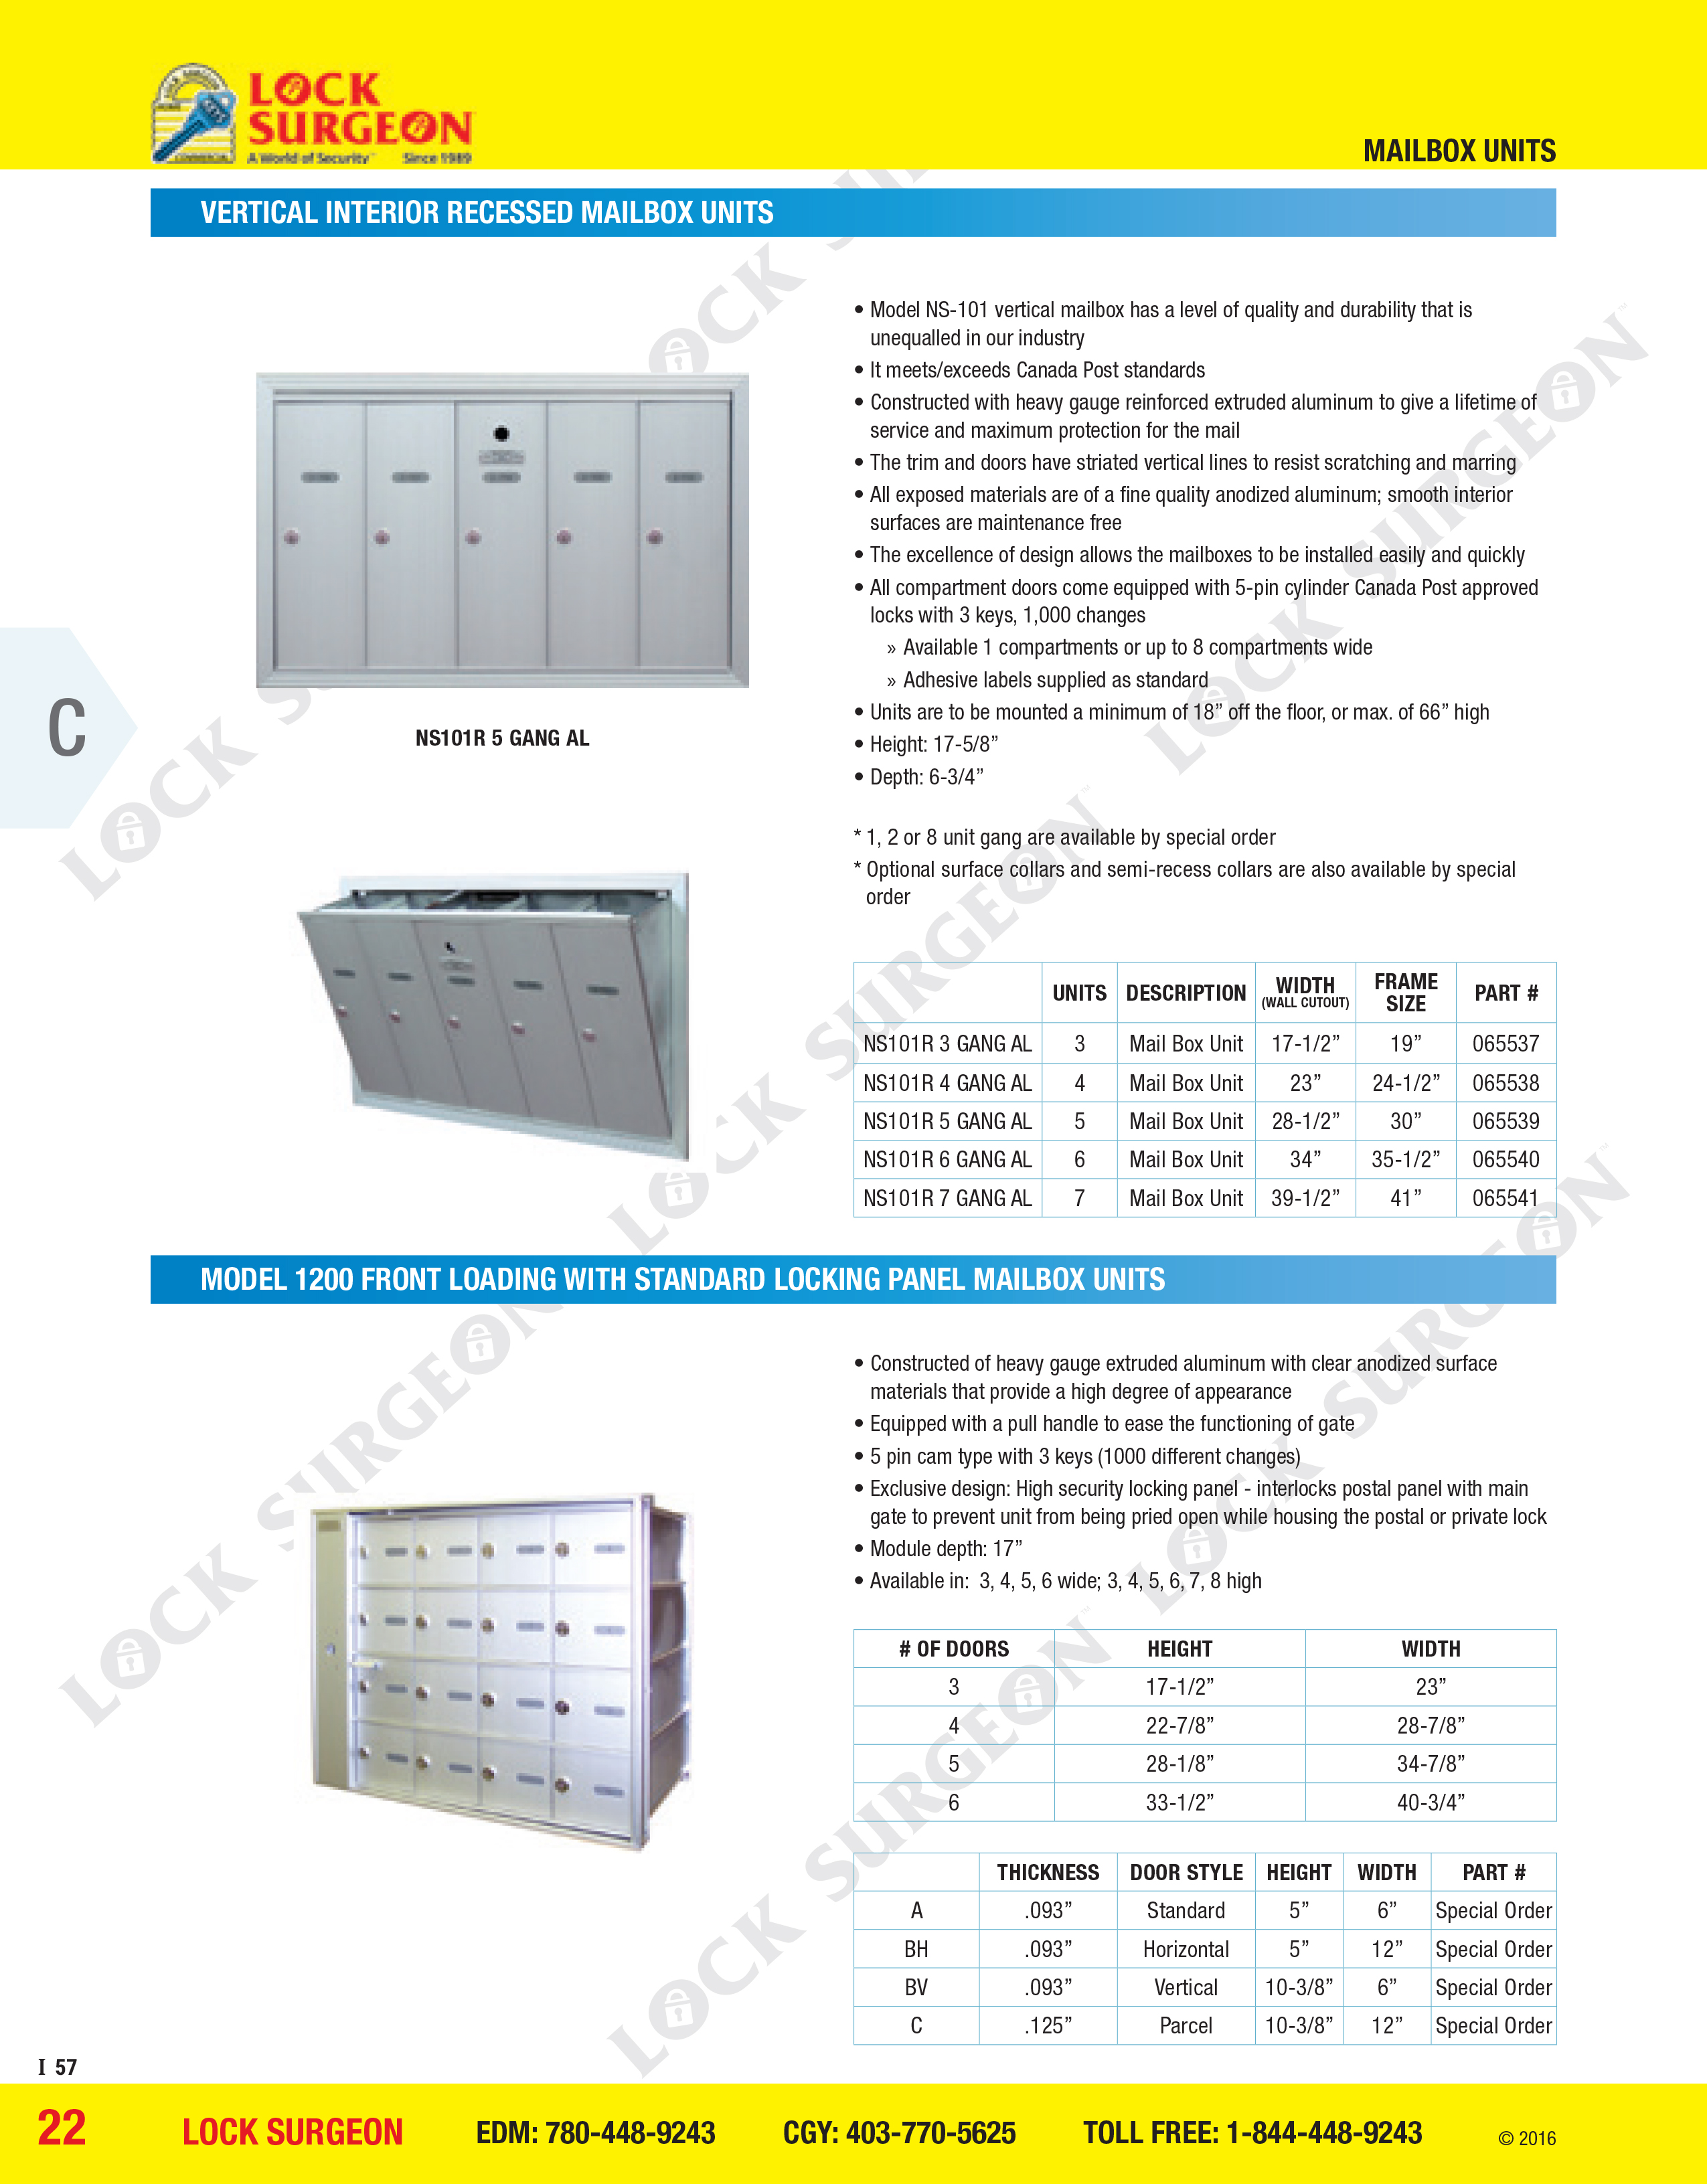 Vertical interior recessed mailbox units Model 1200 front loading standard locking panel Acheson.